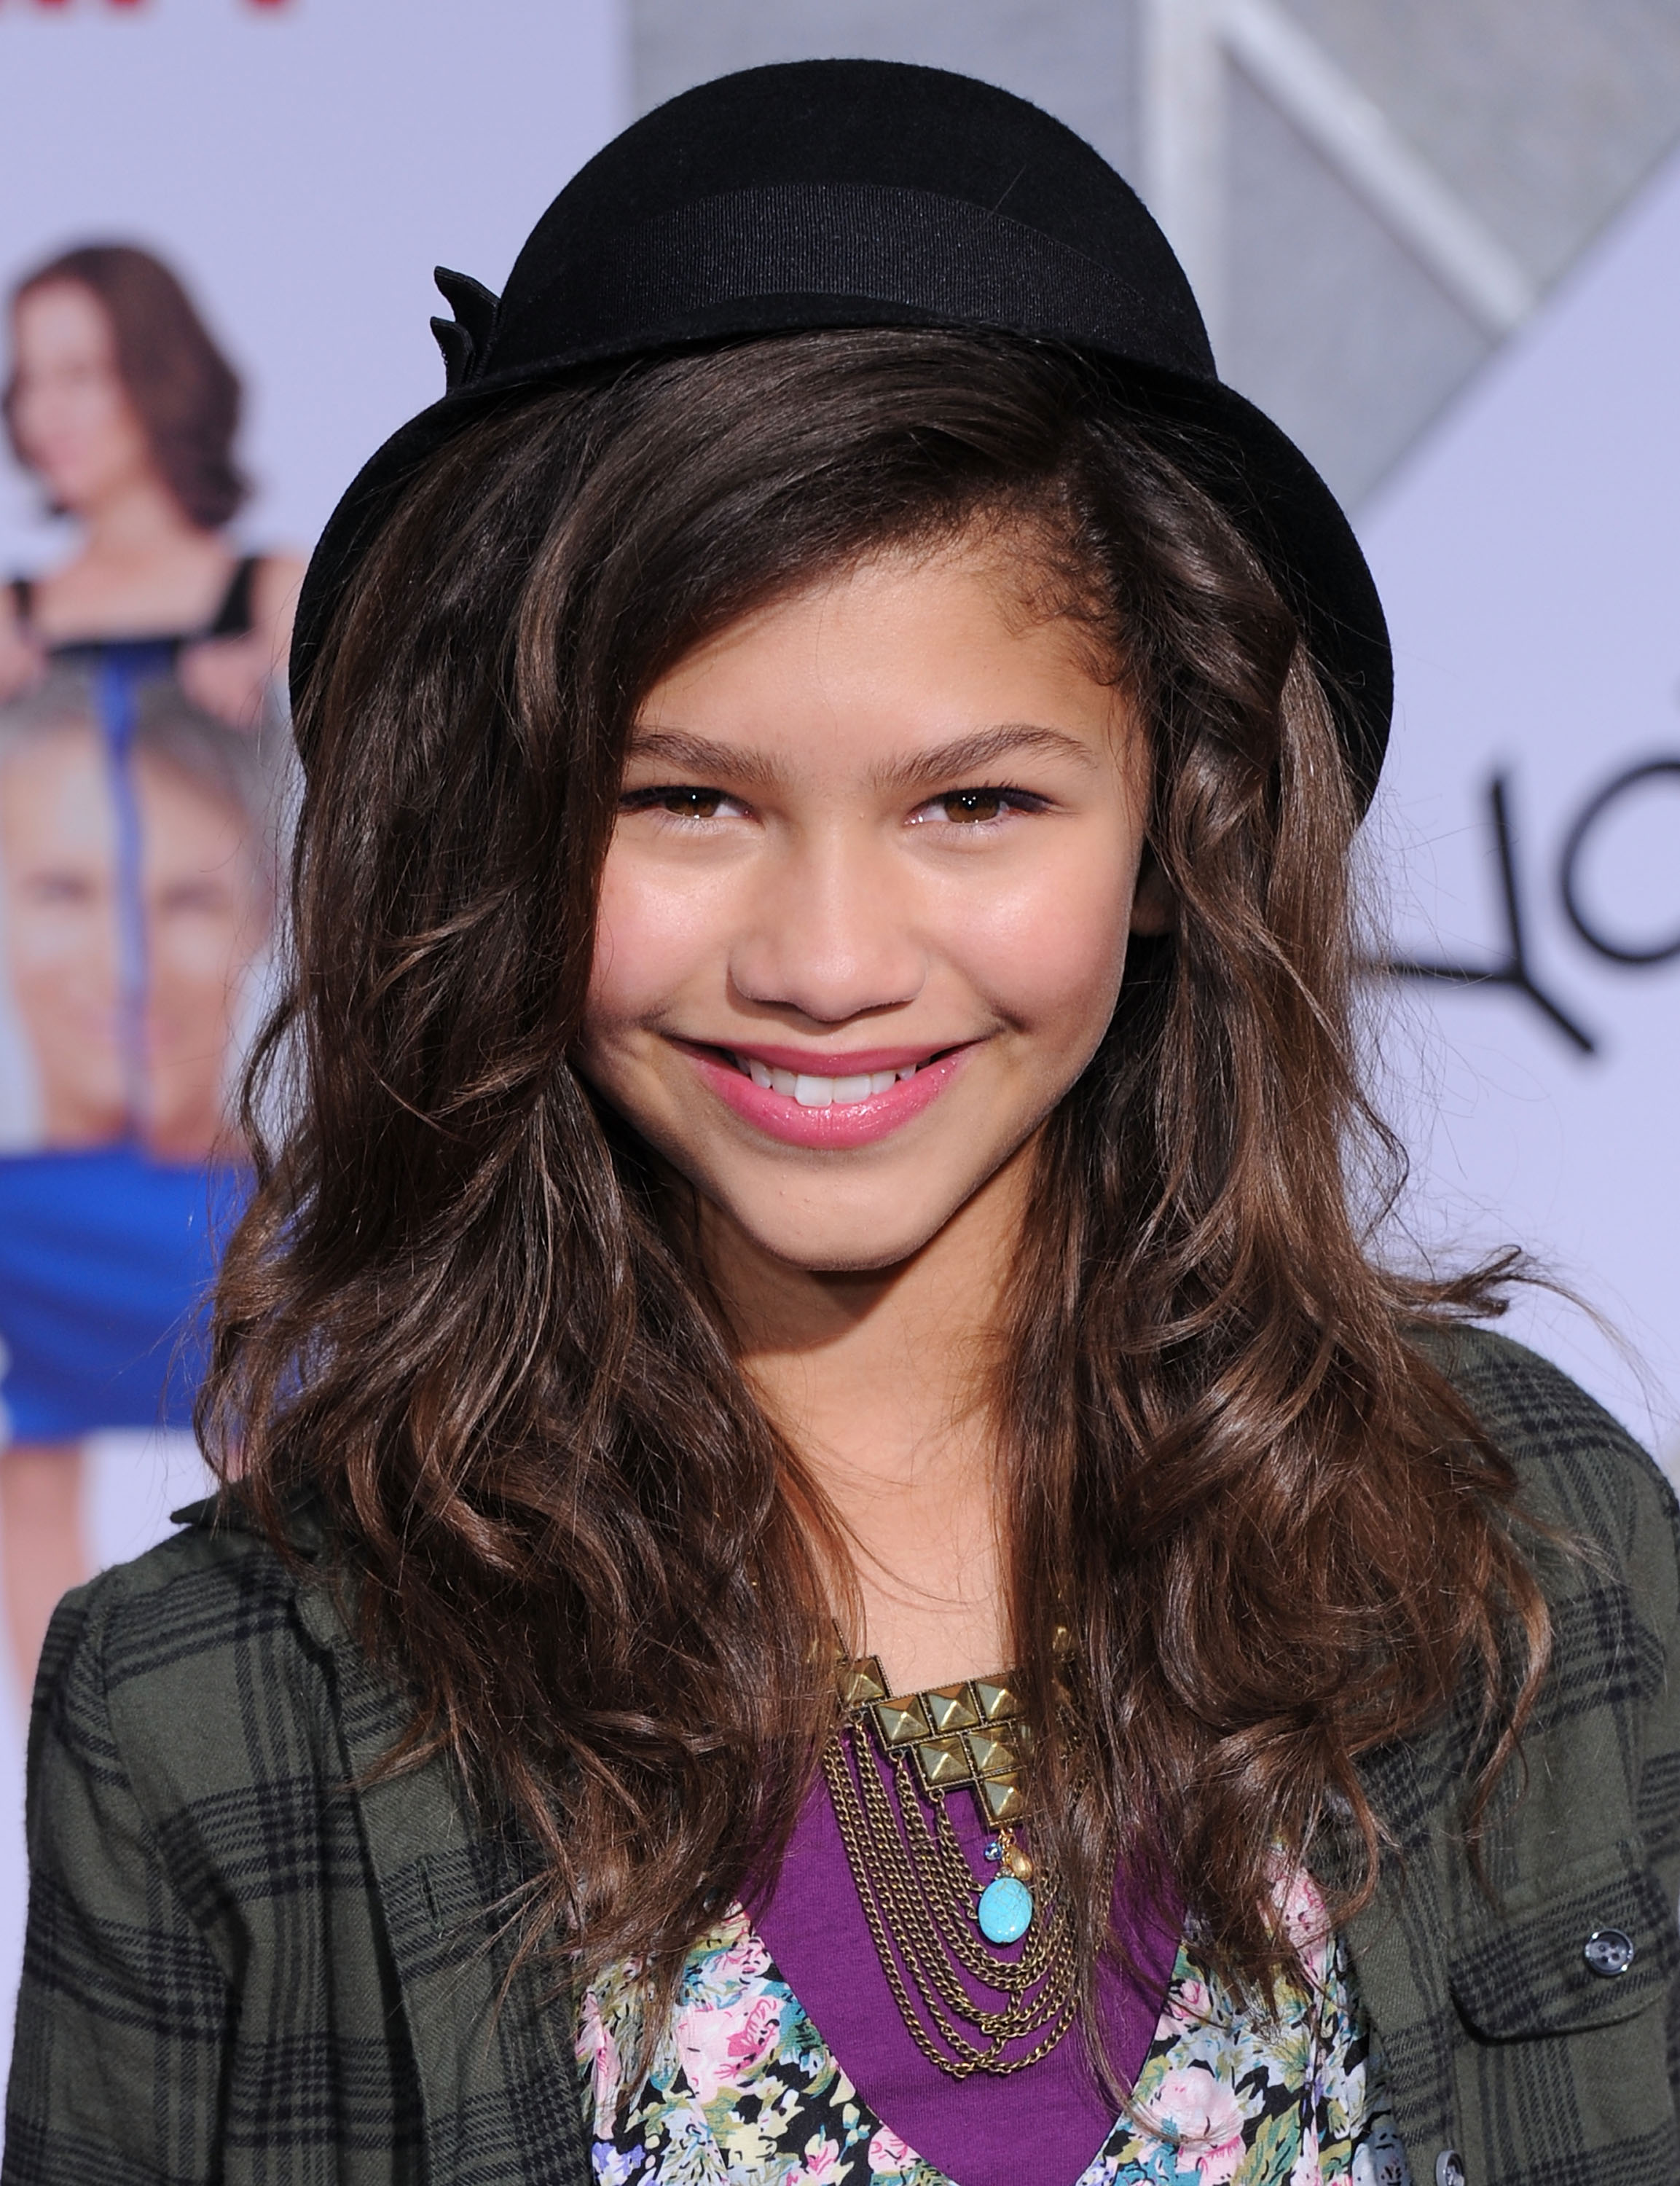 Zendaya Coleman arrives at the Los Angeles Premiere "You Again" at the El Capitan Theatre in Hollywood, California, on September 22, 2010. | Source: Getty Images